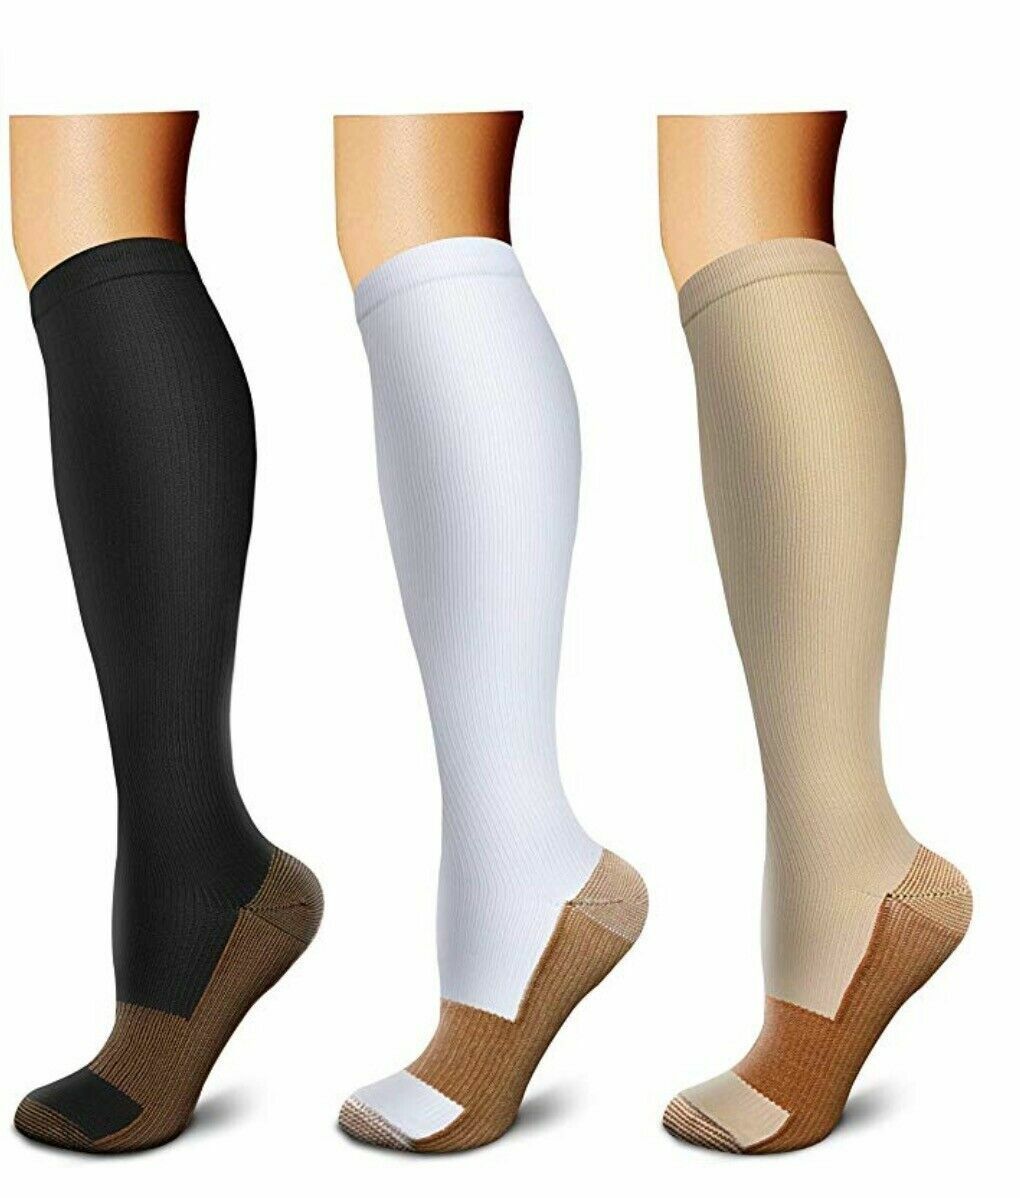 (3 Pairs) (S-XXXL) Copper Compression Support Socks 20-30mmHg Knee High Unisex Copper Compression Socks Does Not Apply